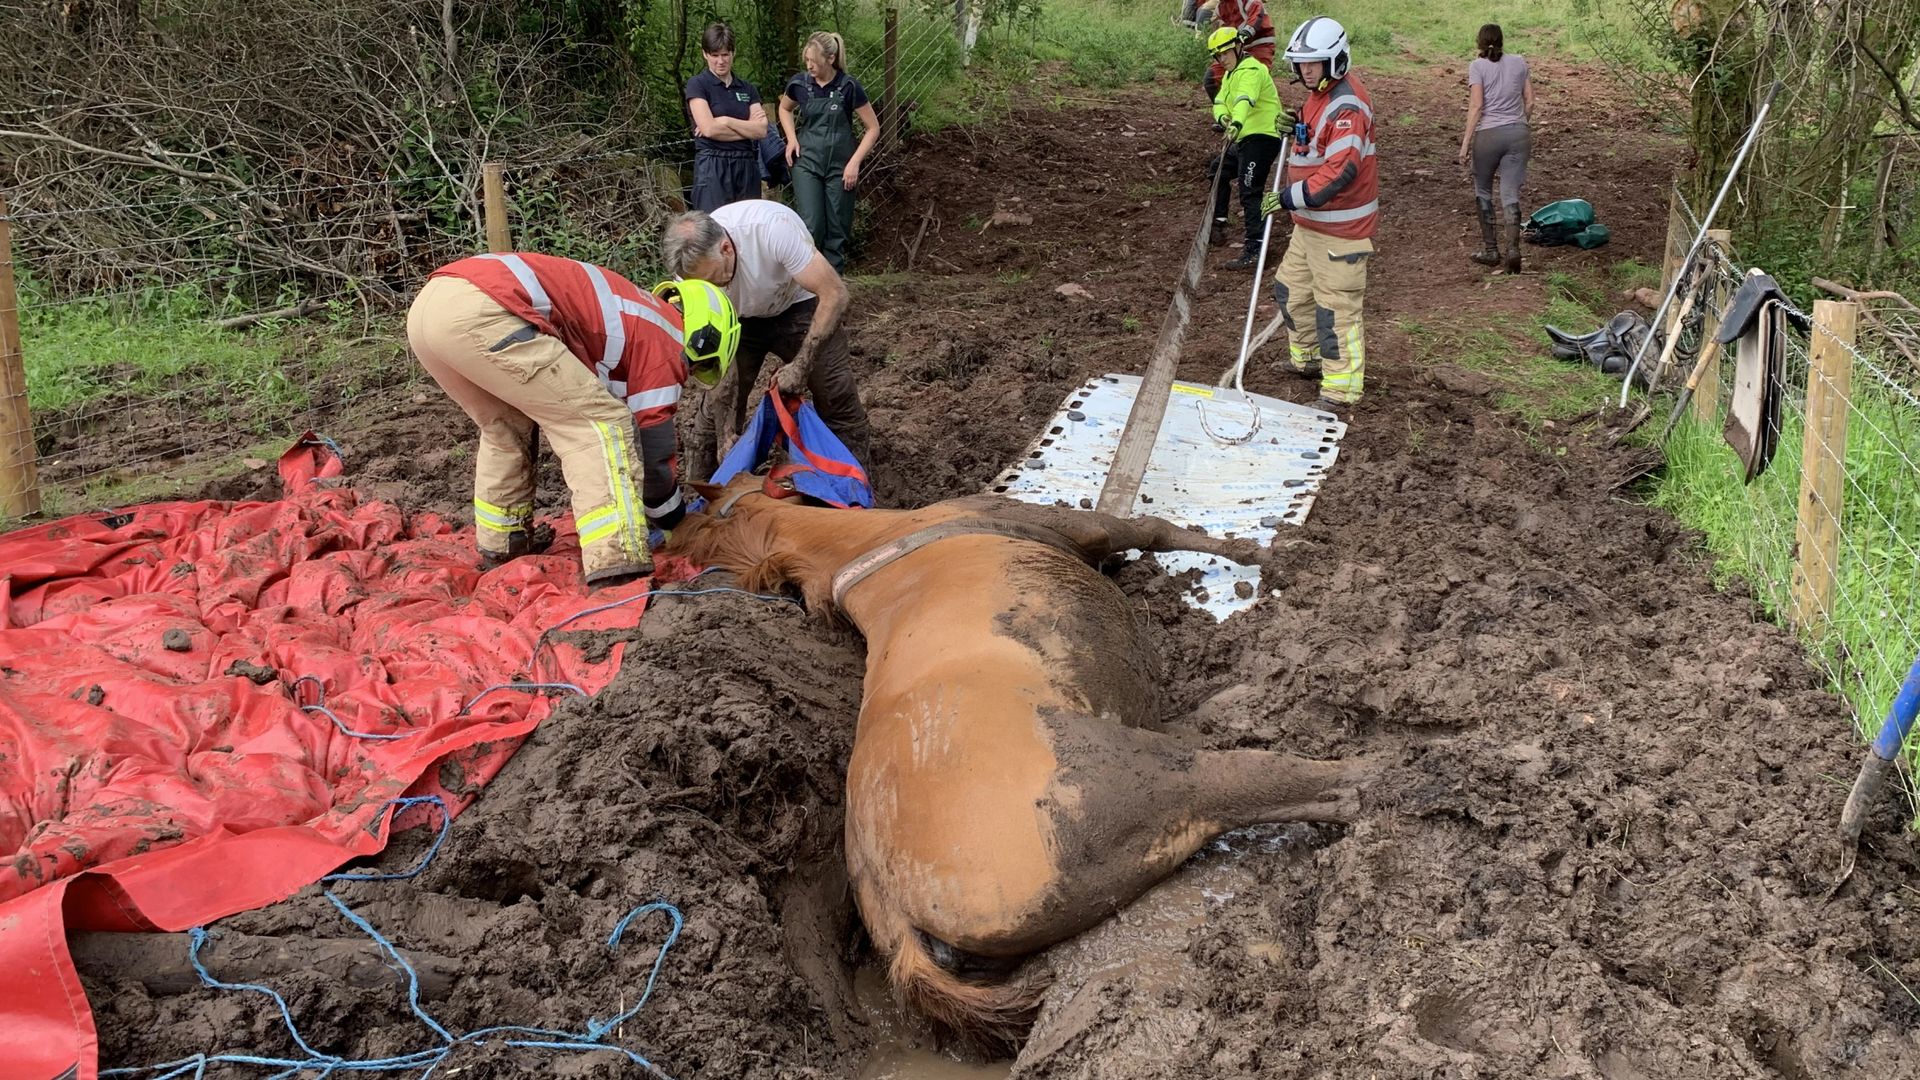 Fire crews rescue horse from bog in two-hour operation